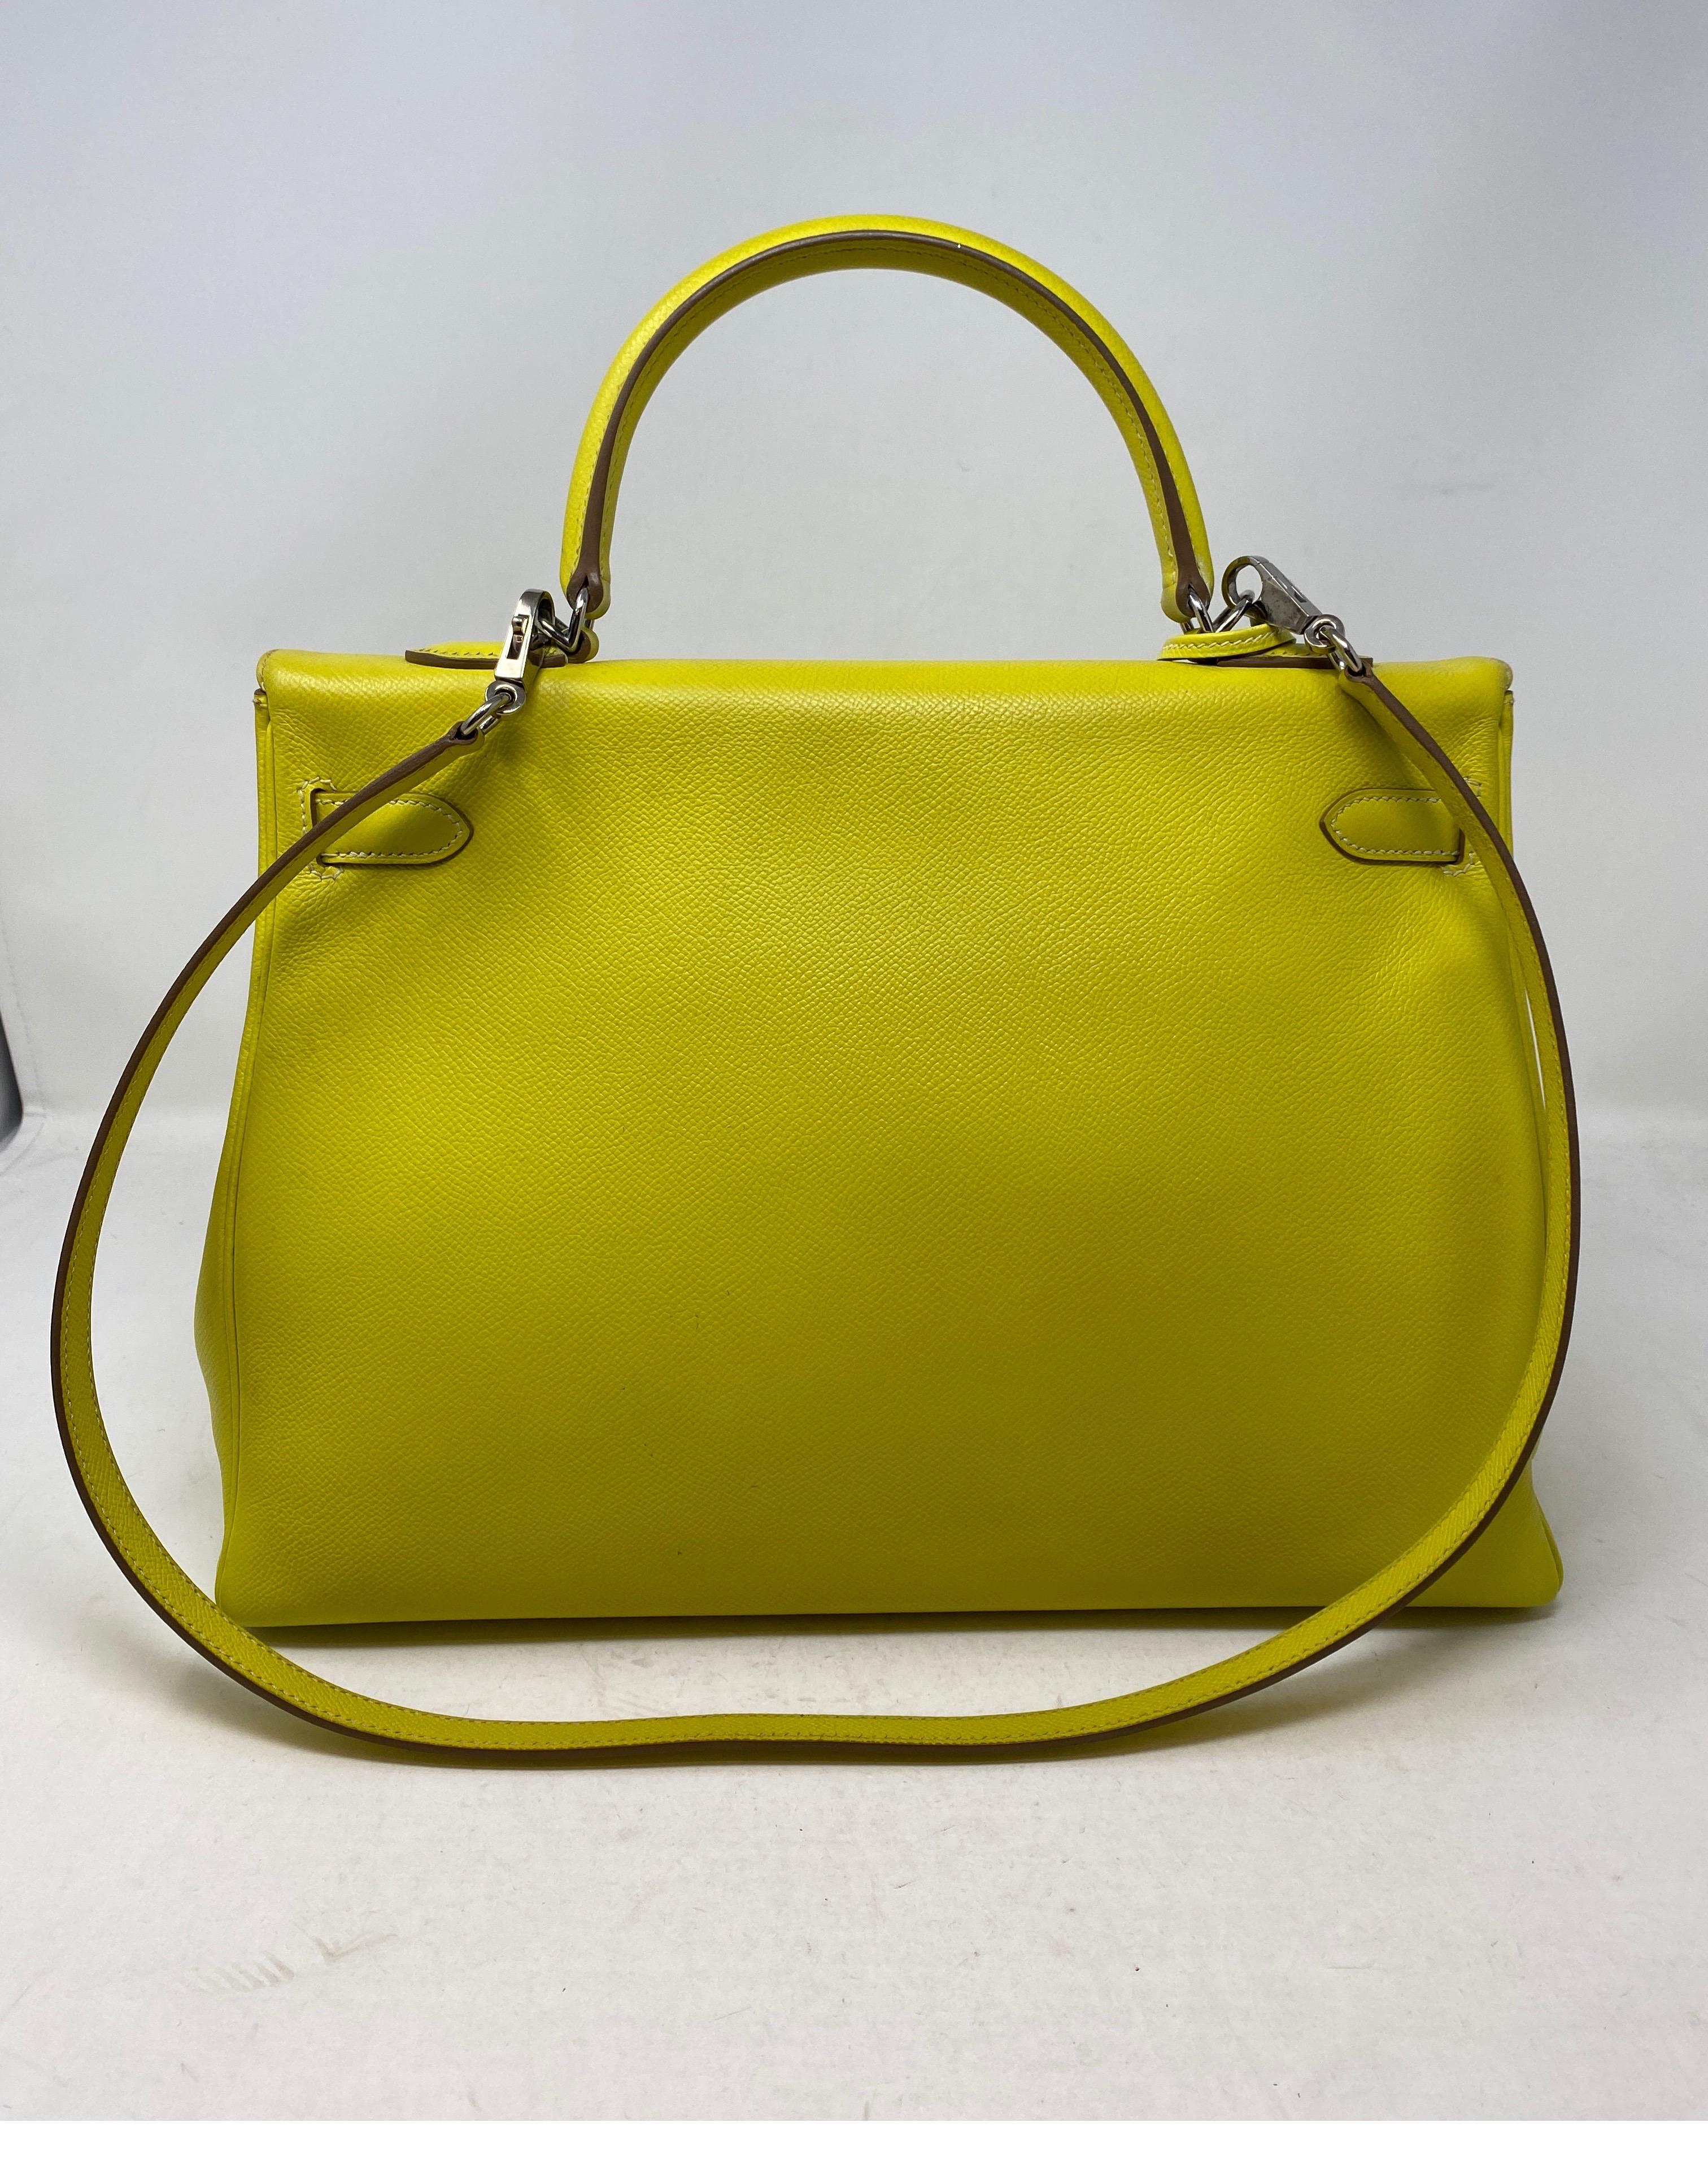 Hermes Kelly 35 Lime/ Gris Perle Candy Bag. Exterior lime color. Palladium hardware. Epsom leather. Rare color combo. Inside light grey color. Light wear on corners. Good condition. Includes clochette, lock, keys, and dust cover. Guaranteed